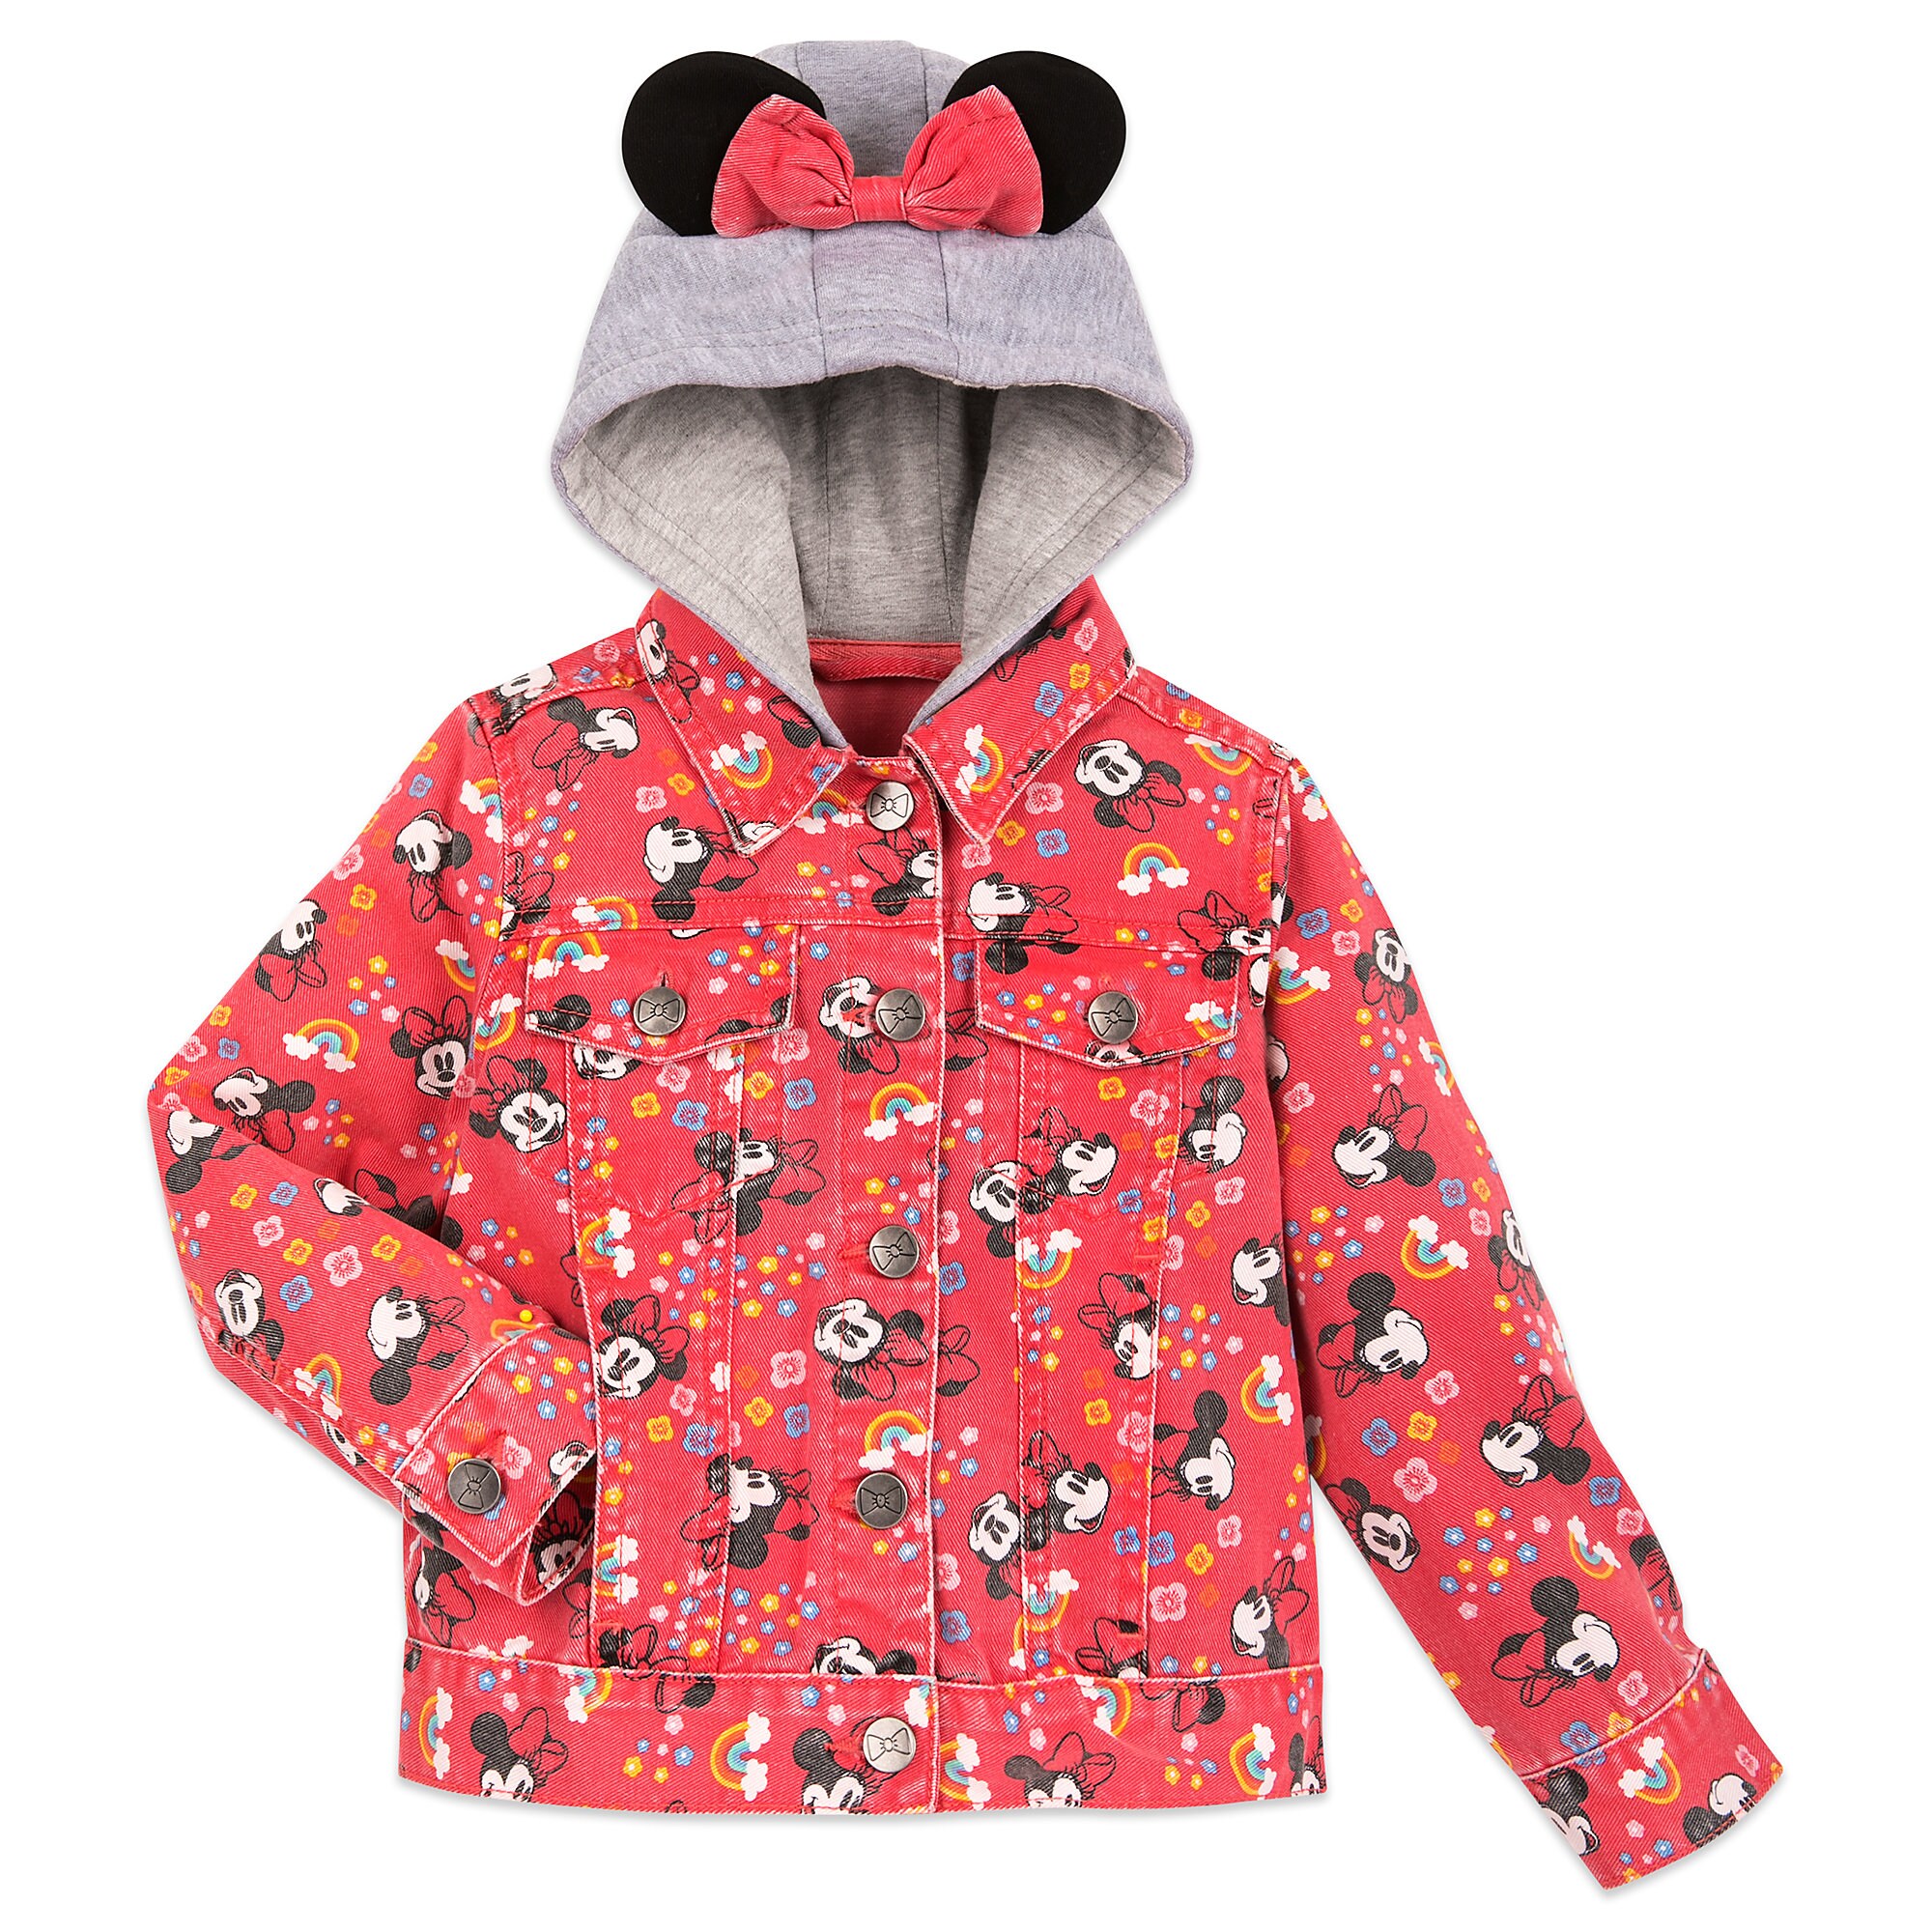 Minnie Mouse Hooded Denim Jacket for Girls